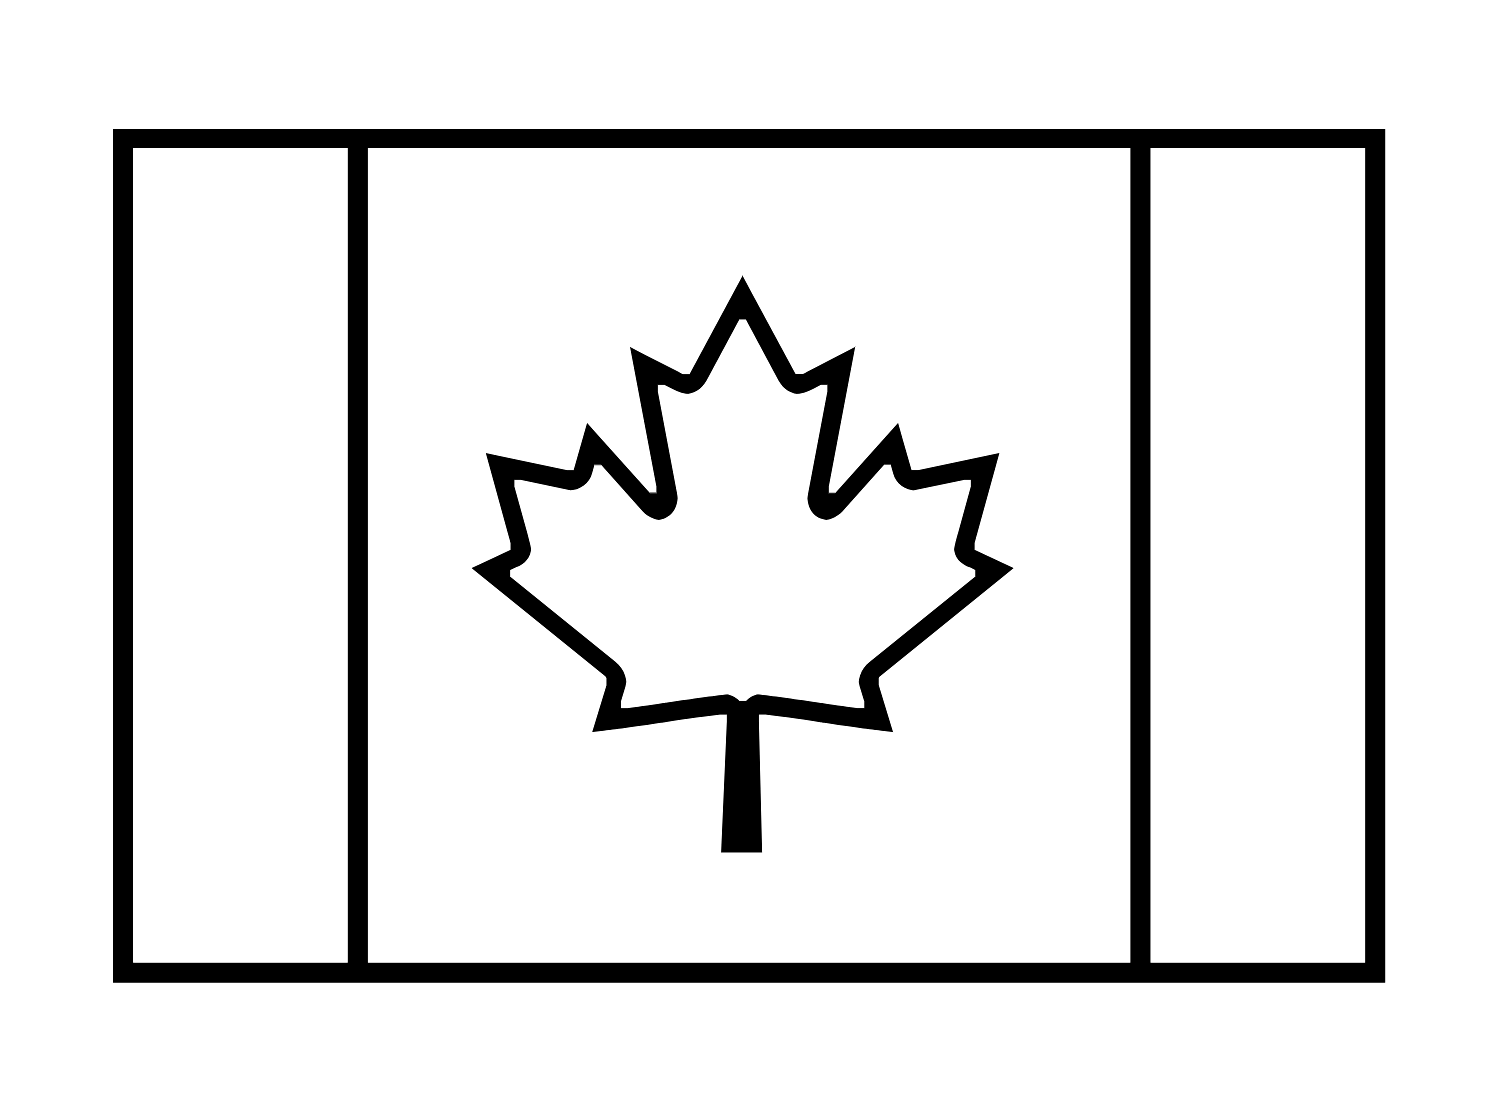 canadian symbols coloring pages